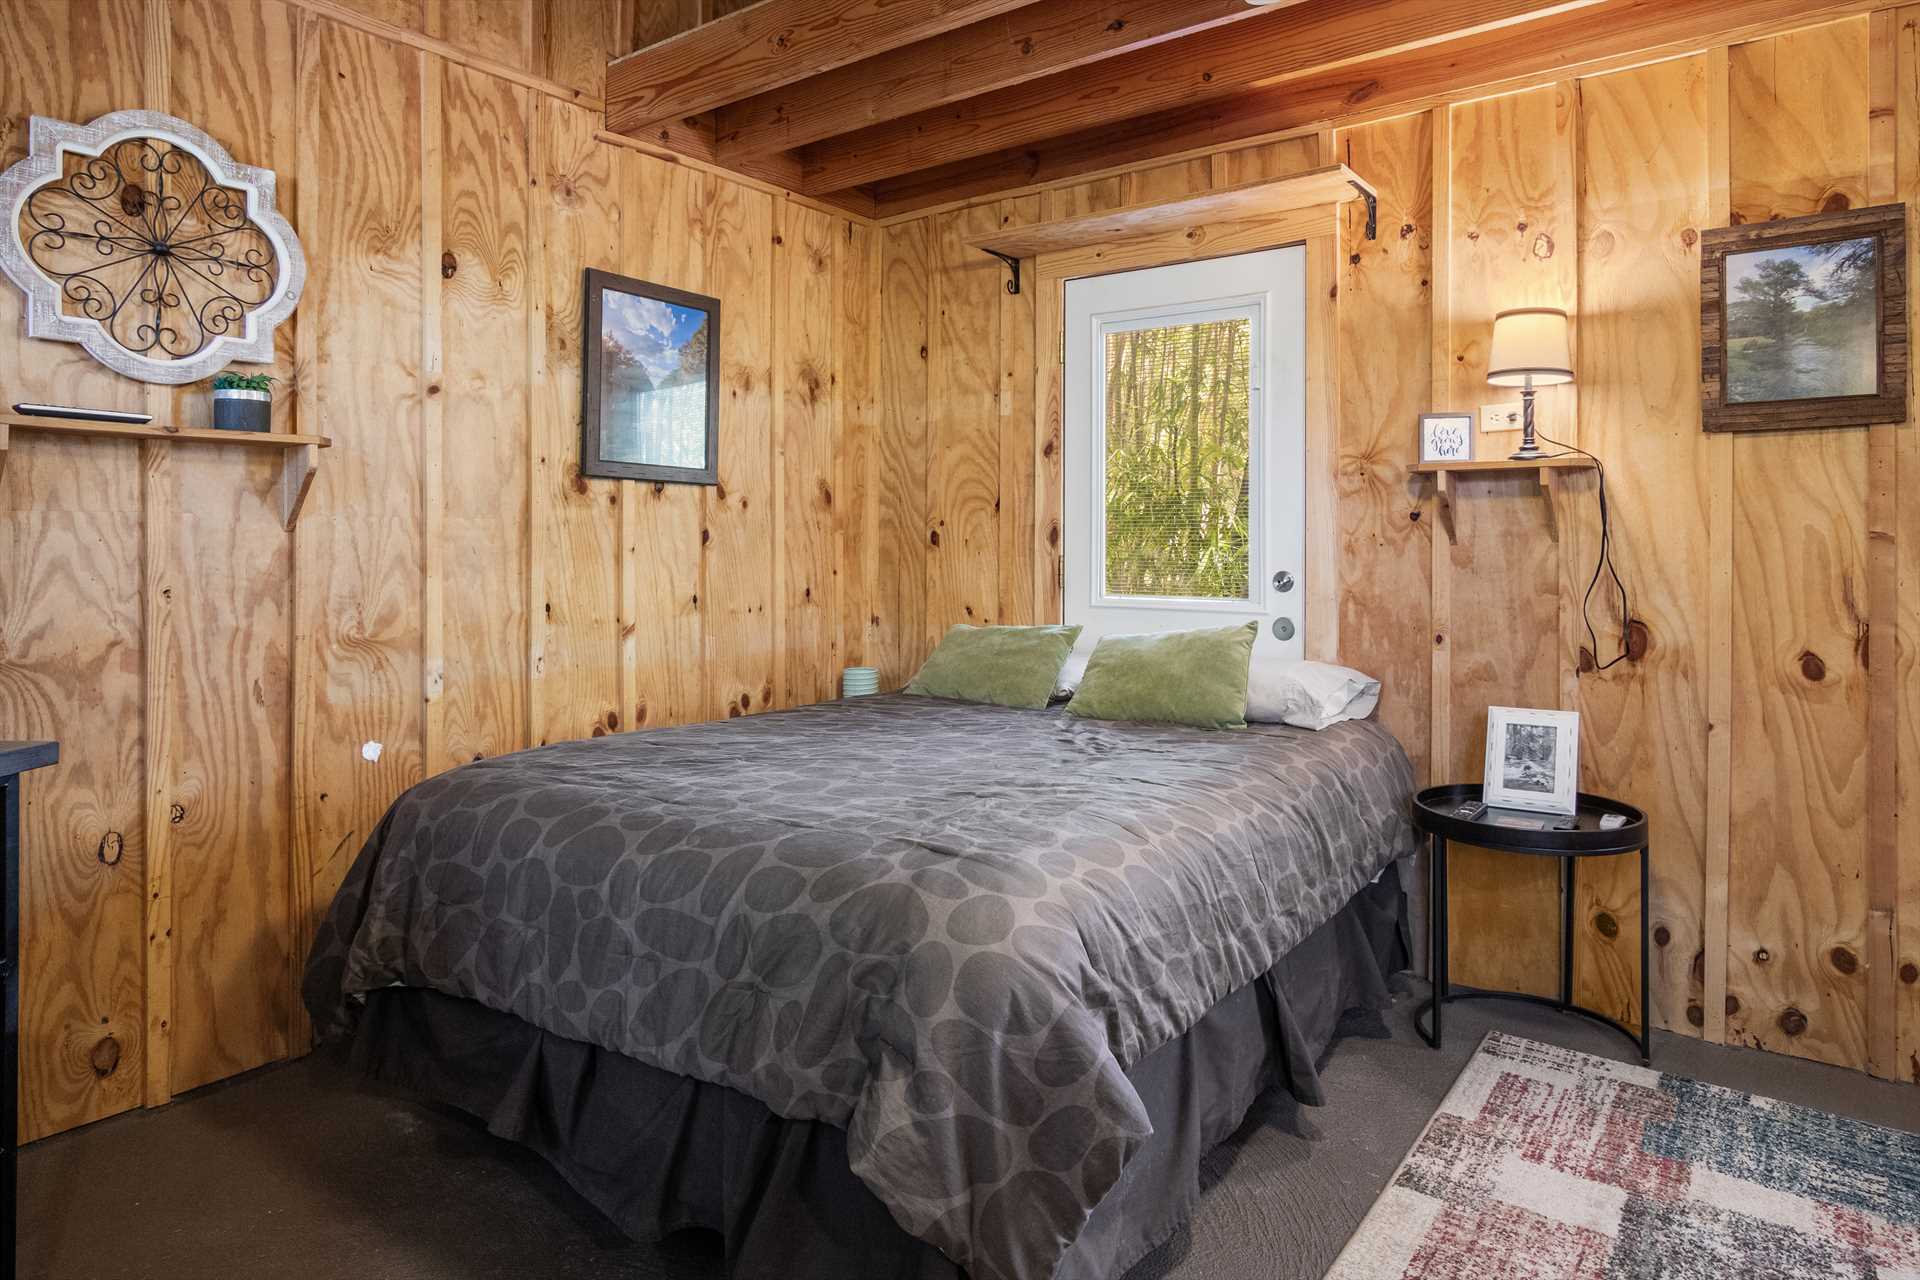                                                 Inside, you'll find a plush queen-sized bed with clean linens, perfect for two! An additional queen-sized air mattress is available upon request, too.